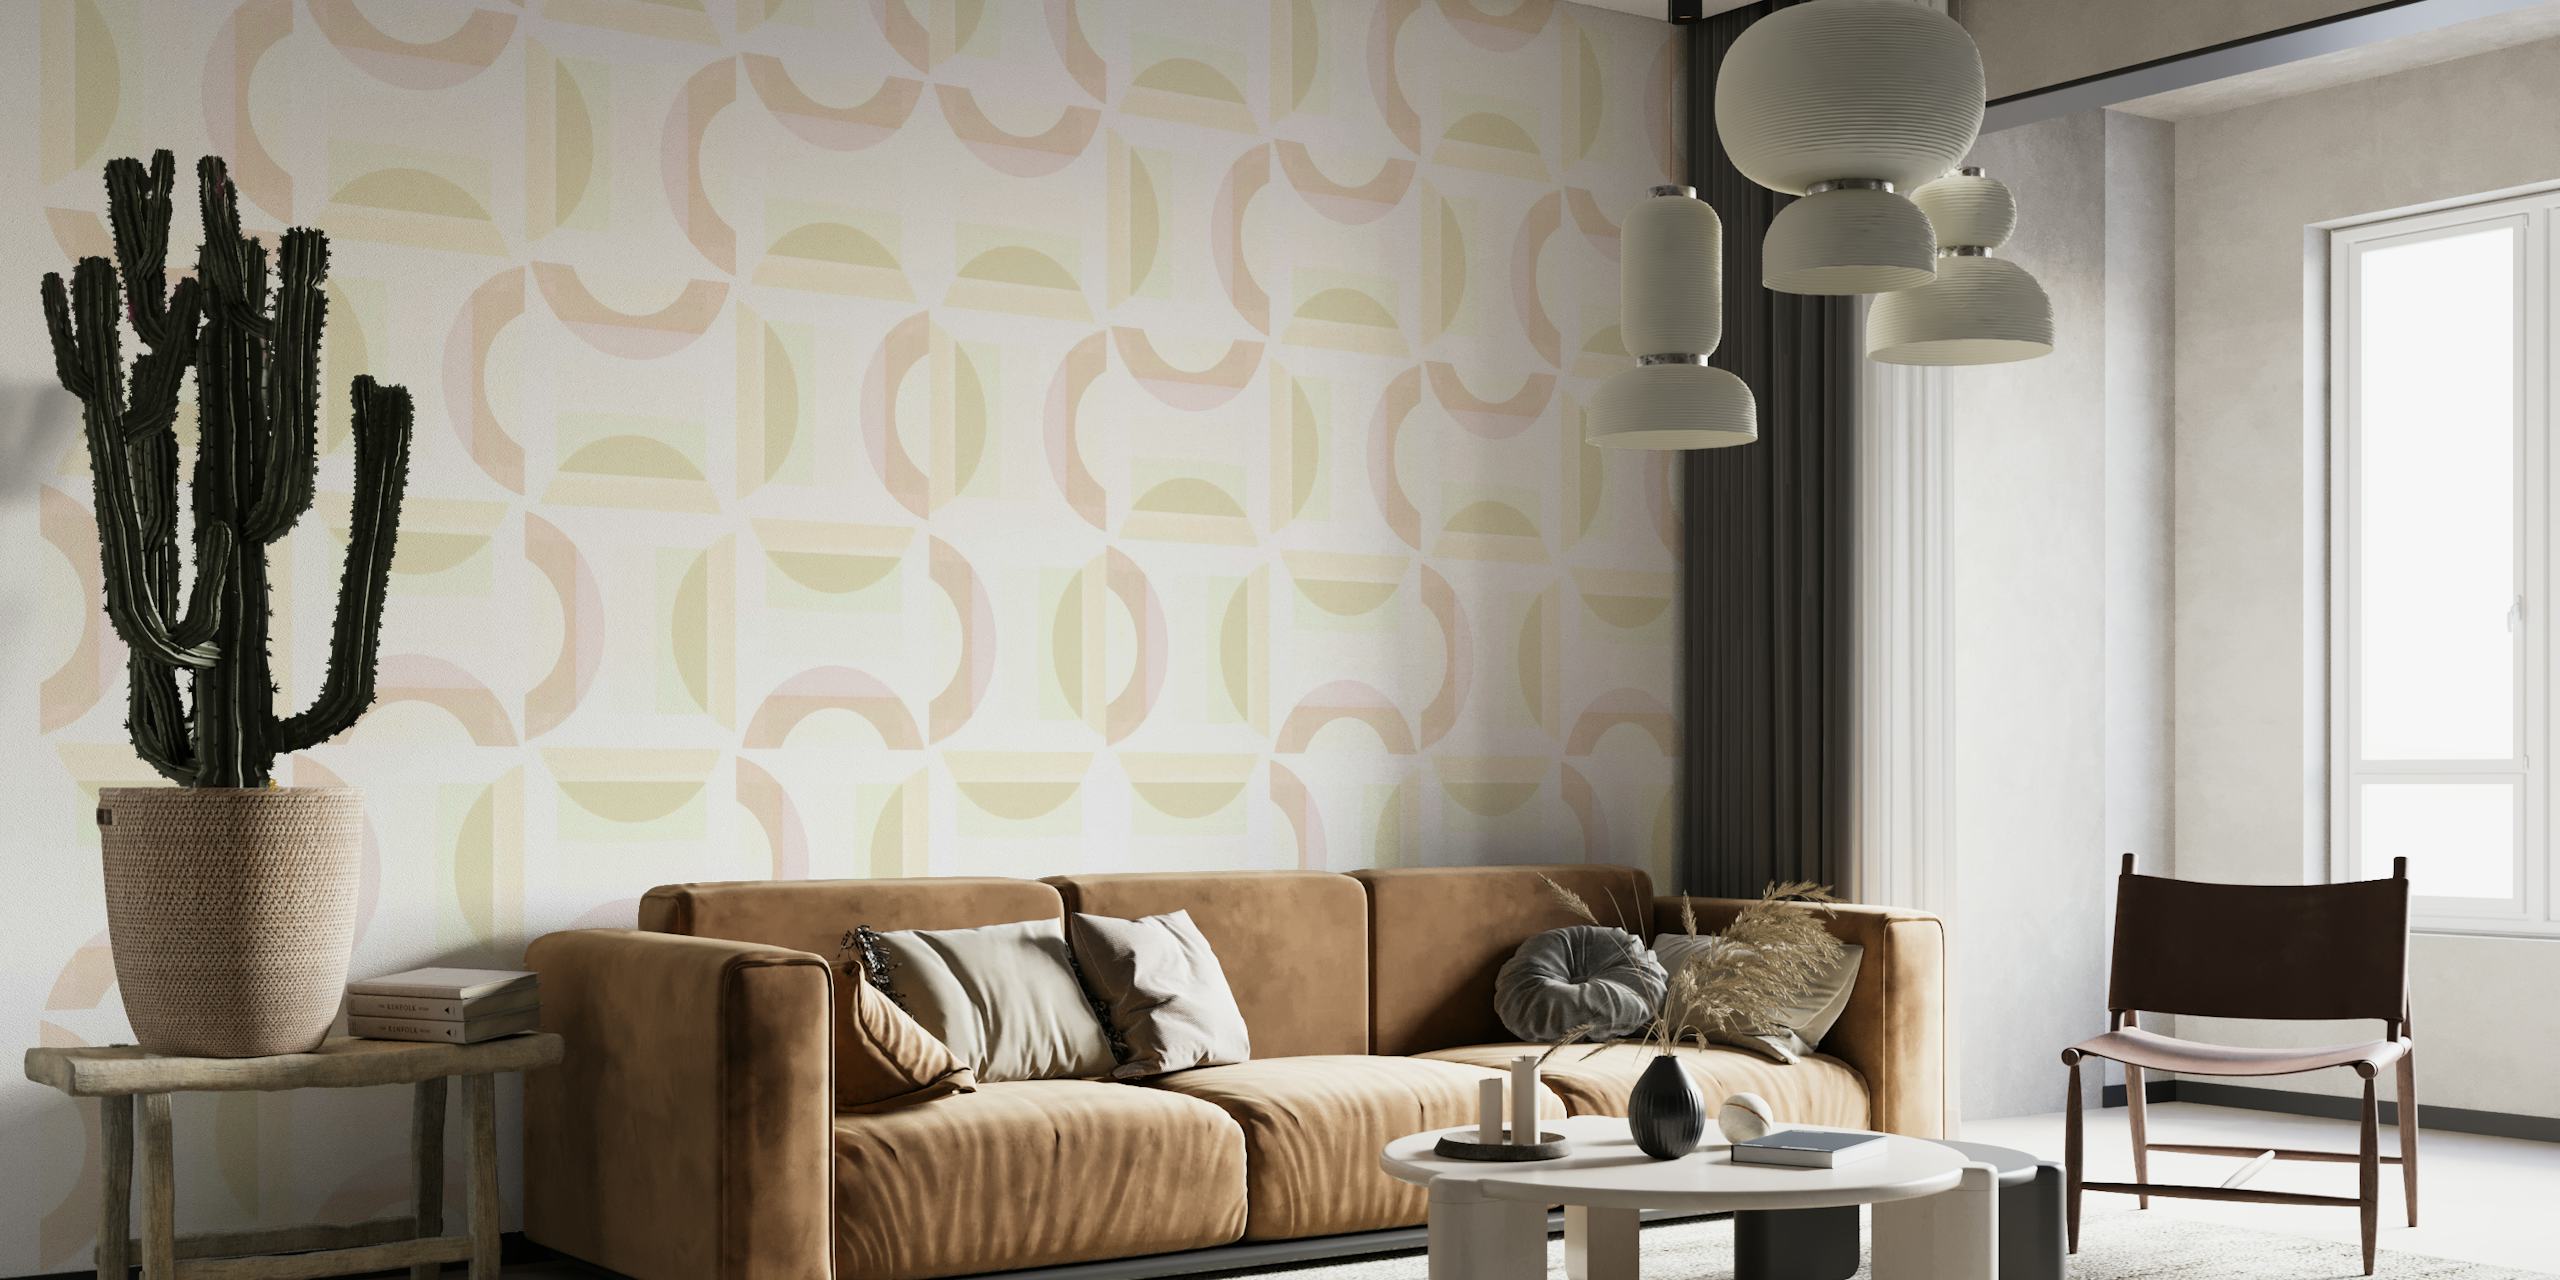 Mid Century modern style sunrise pattern wall mural with soft hues and geometric shapes